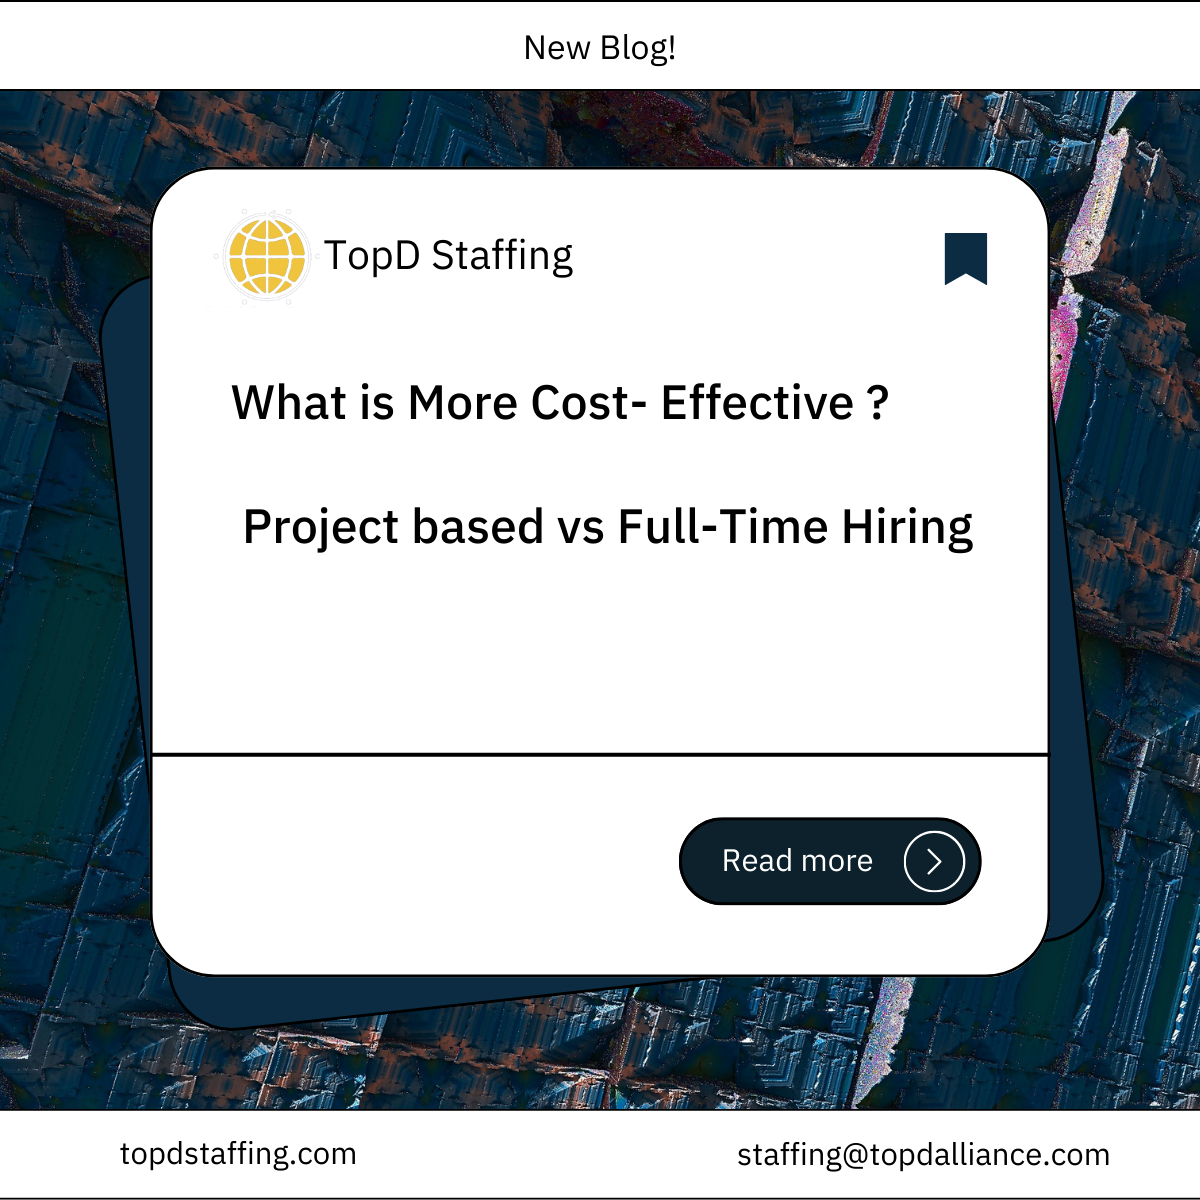 Project-Based vs. Full-Time Hiring: Which is More Cost-Effective in the Long Run?